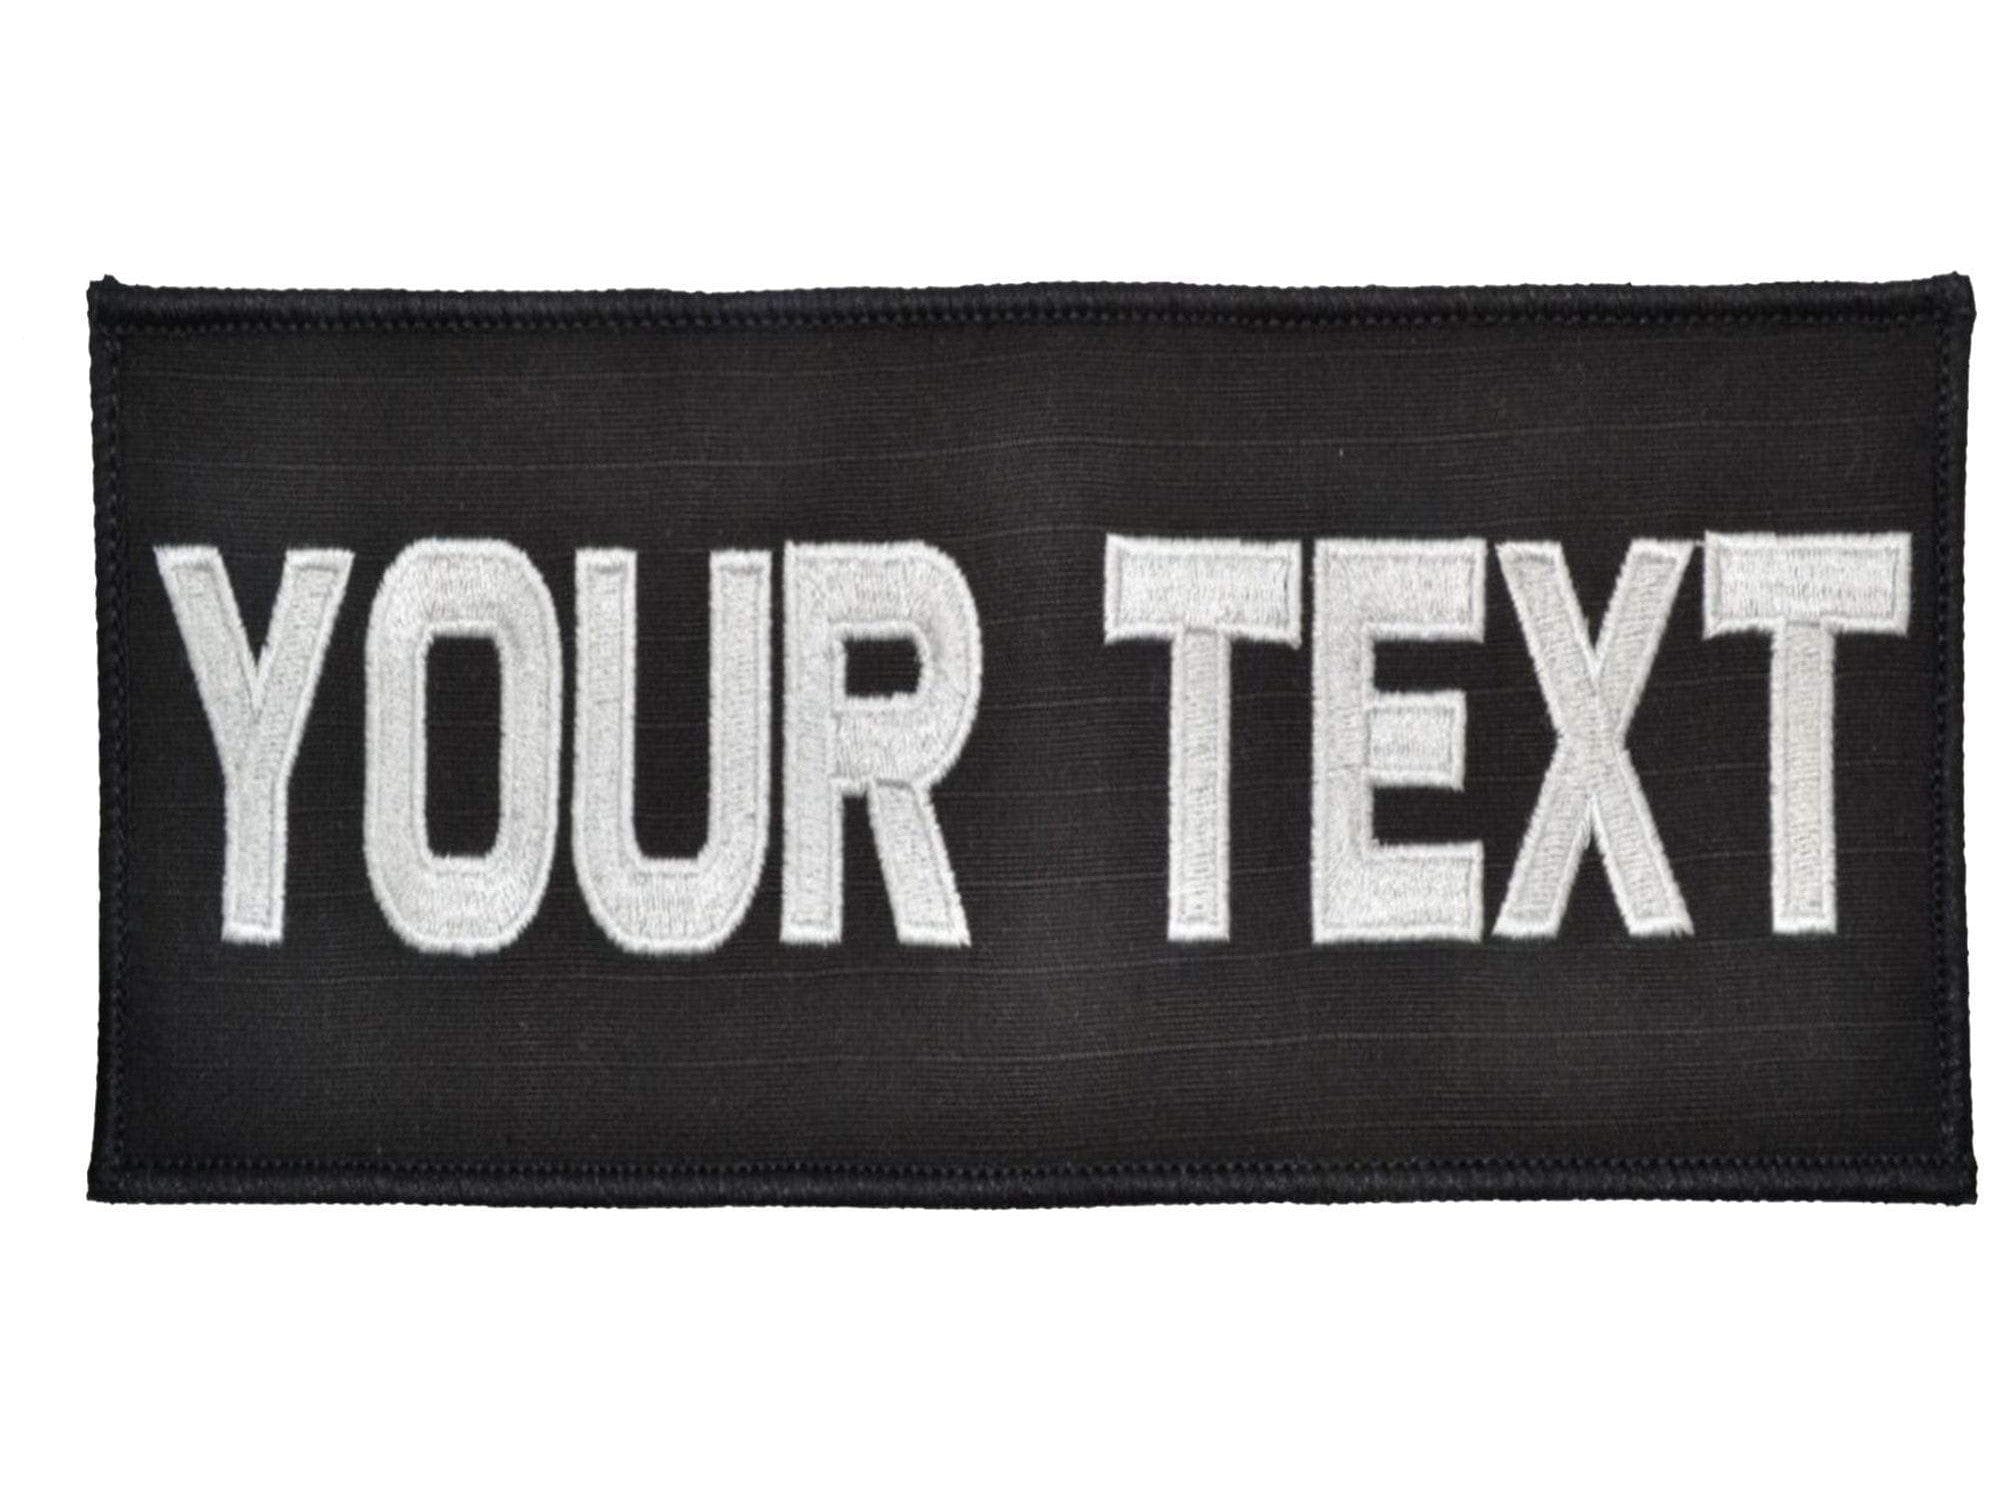 Custom Plate Carrier Text Patch - 2x5